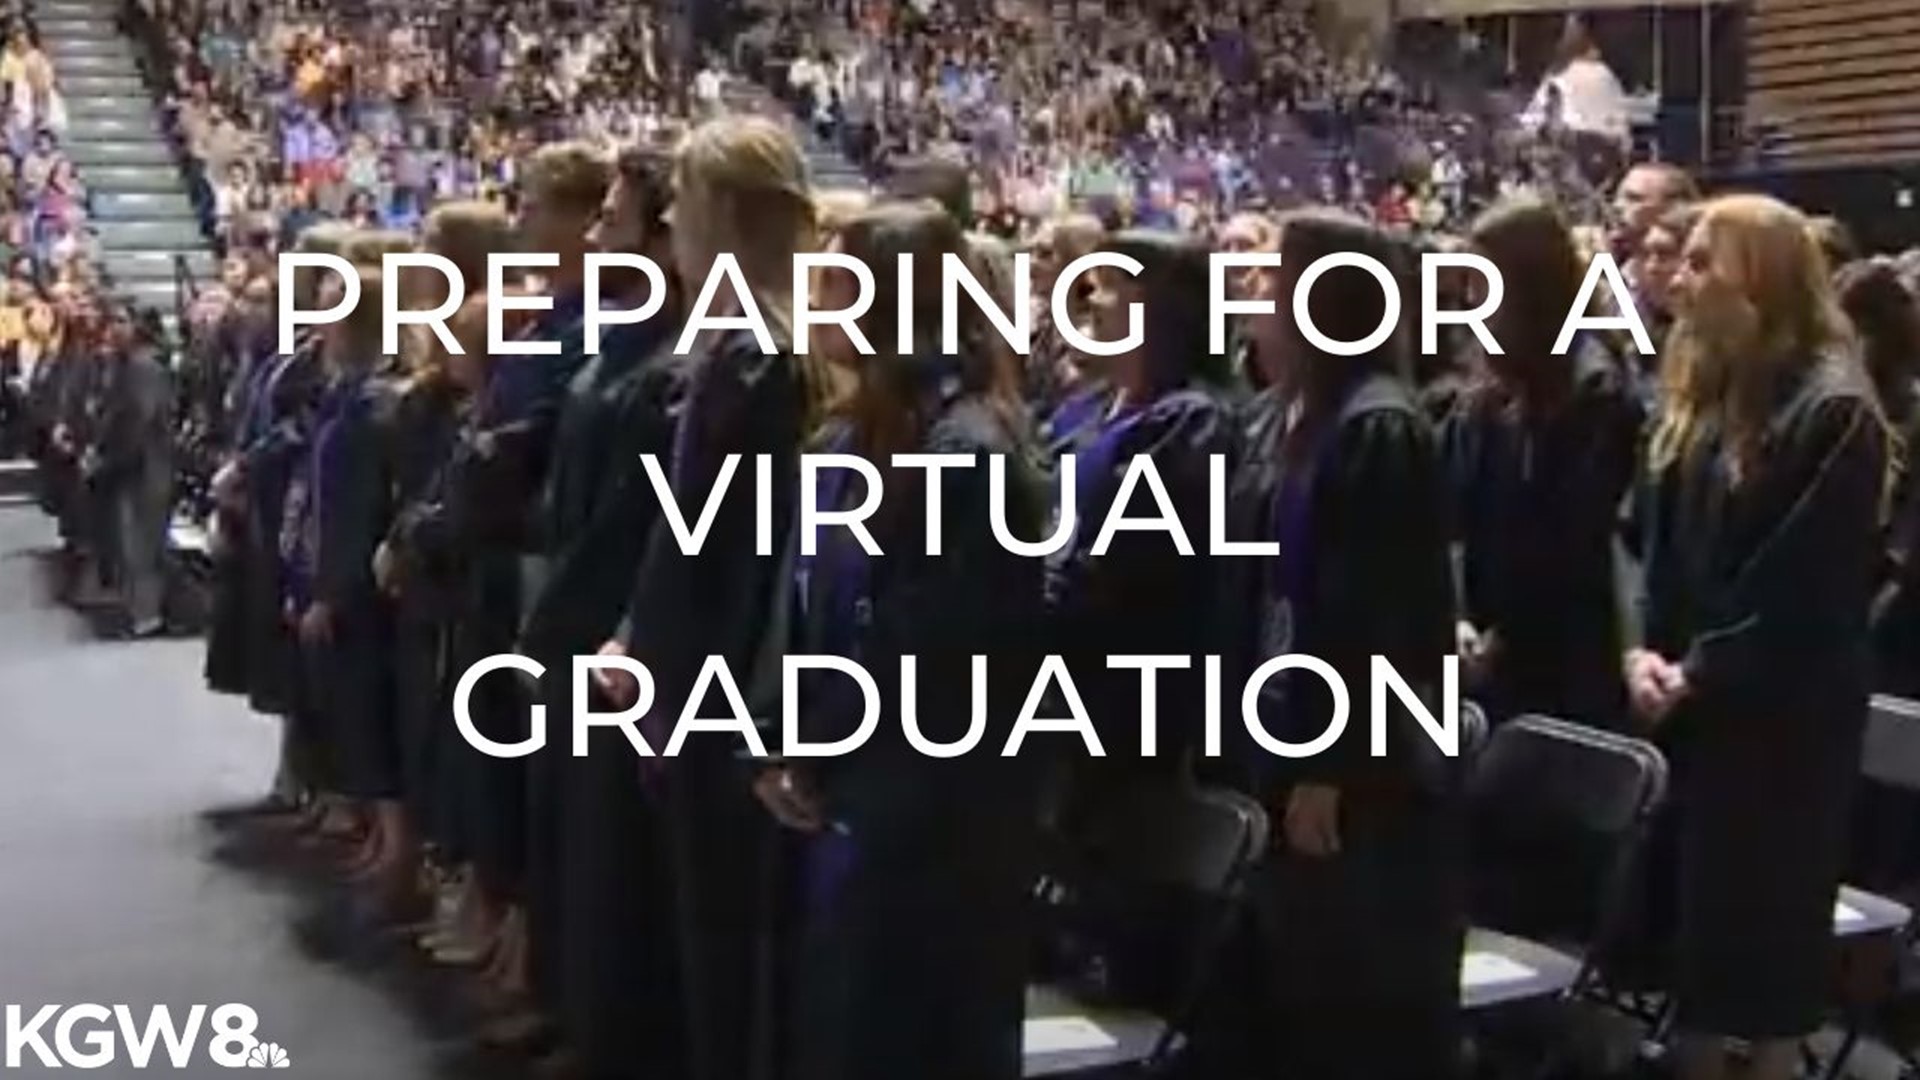 Students are getting ready for a virtual graduation during the pandemic, instead of the traditional ceremony.